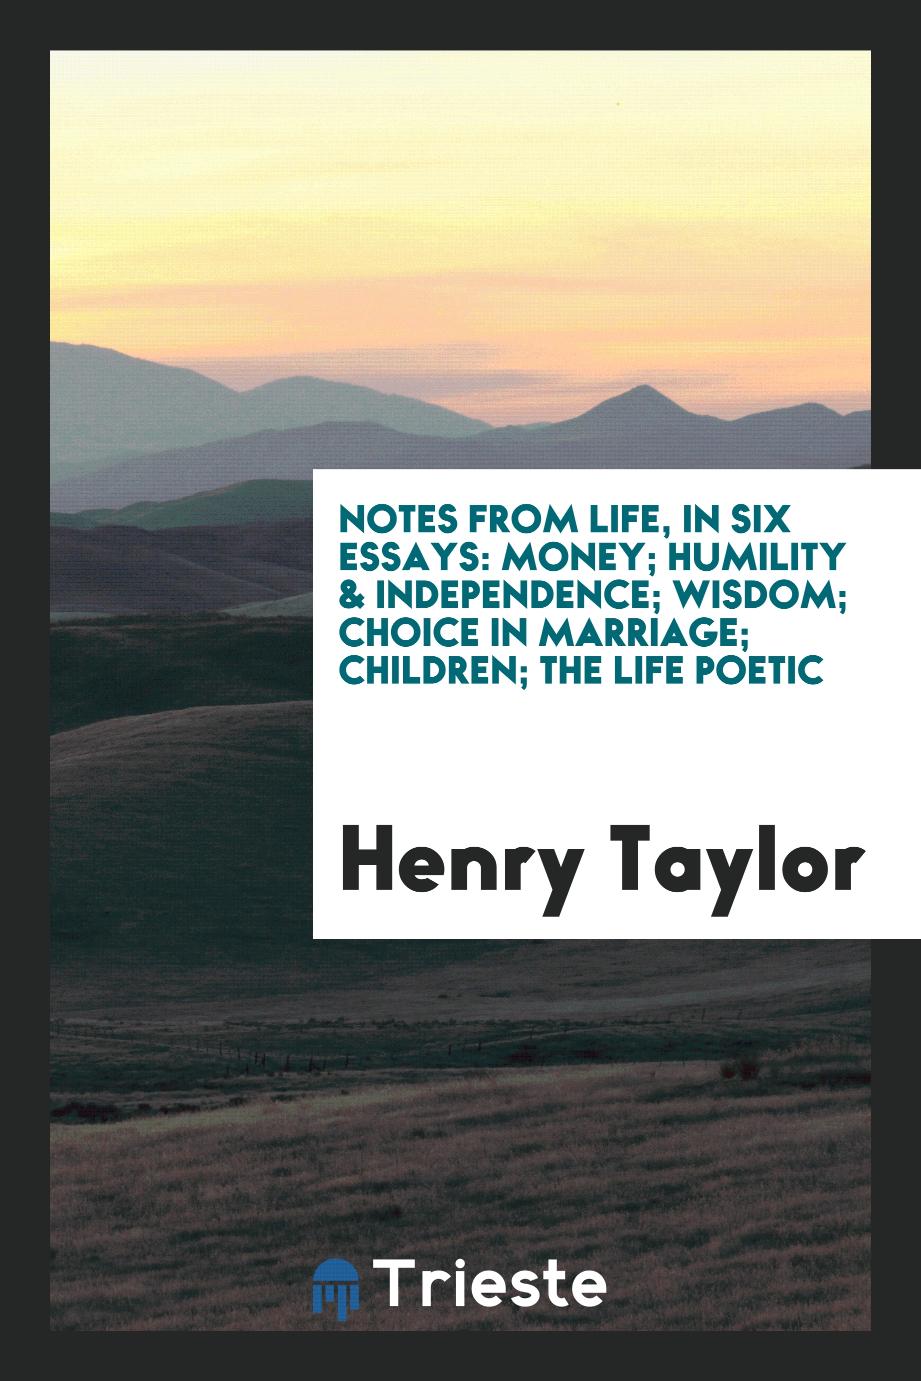 Notes from Life, in Six Essays: Money; Humility & Independence; Wisdom; Choice in Marriage; Children; The Life Poetic